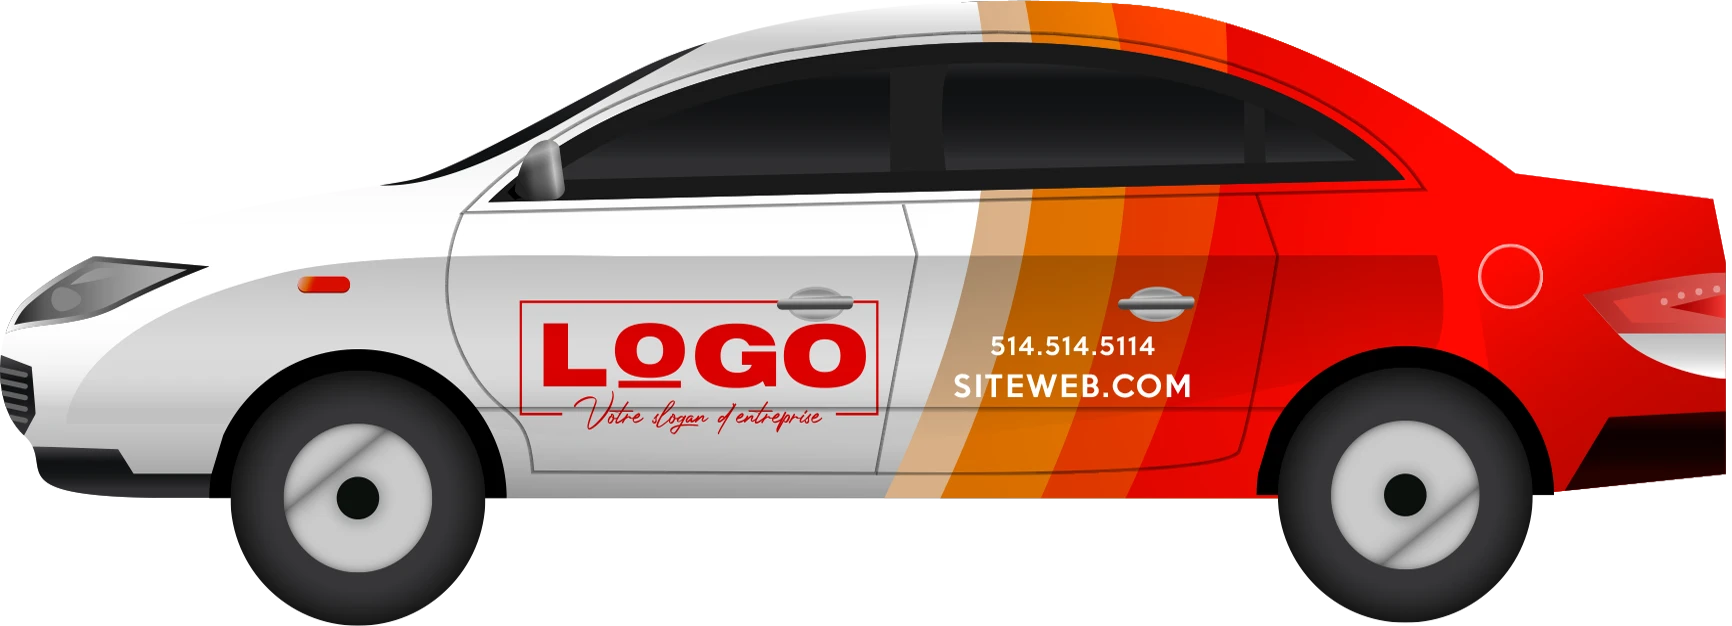 Graphic designer, partial wrapping installer on professional vehicle | Laval, Montréal